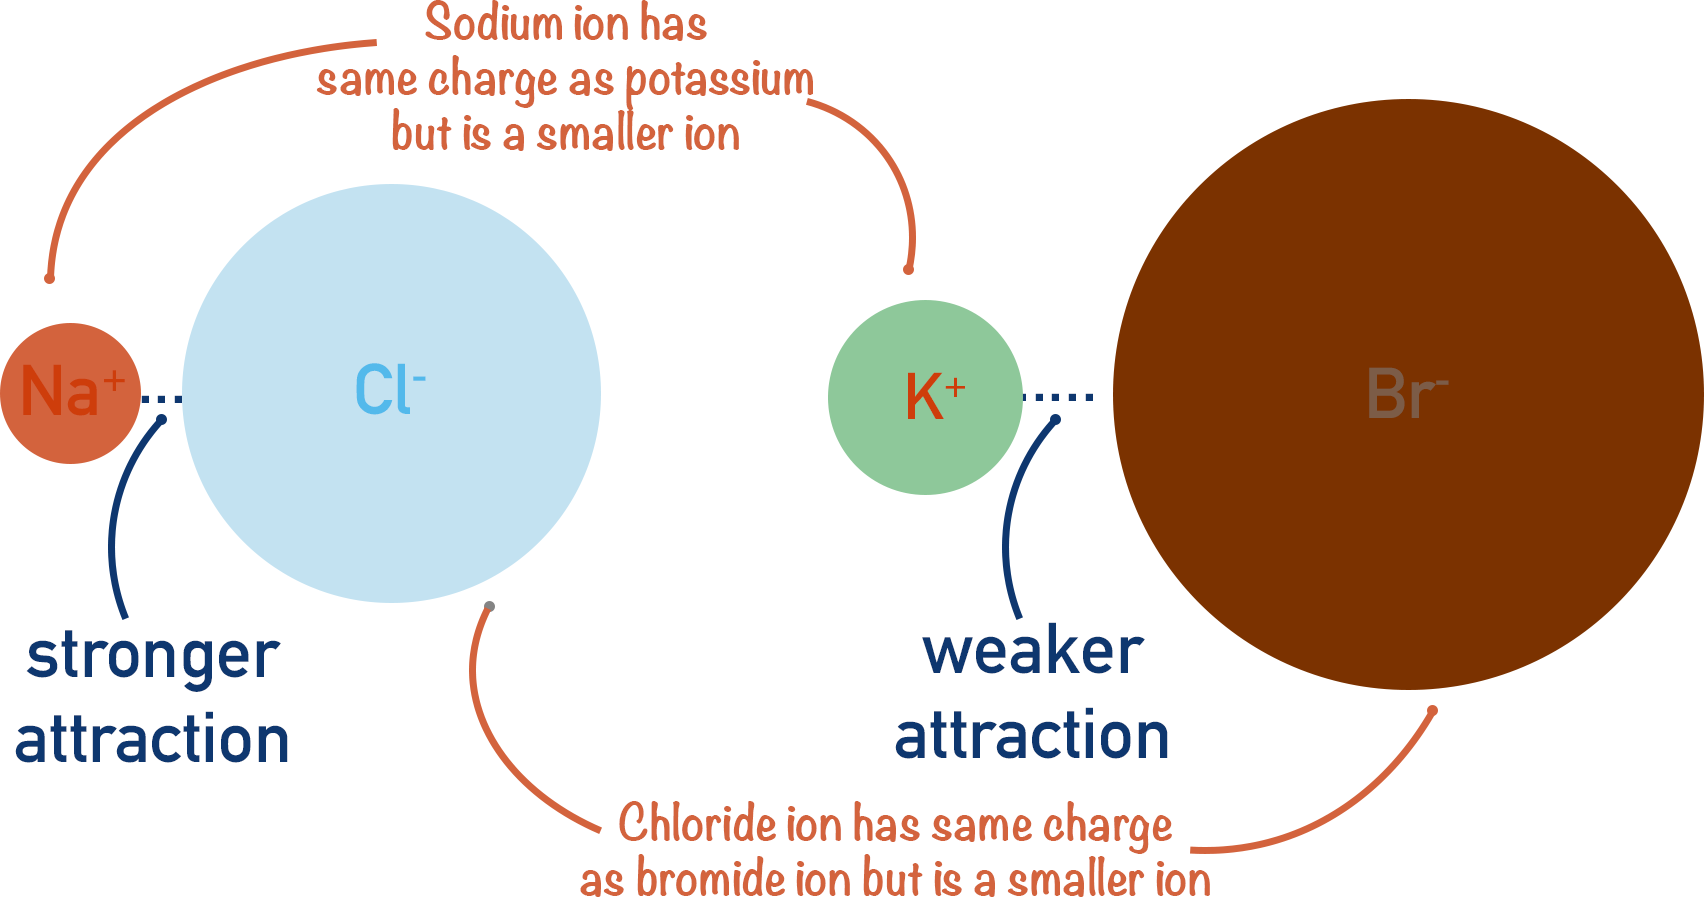 size of ion and strength of ionic attraction lattice enthalpy sodium chloride potassium bromide